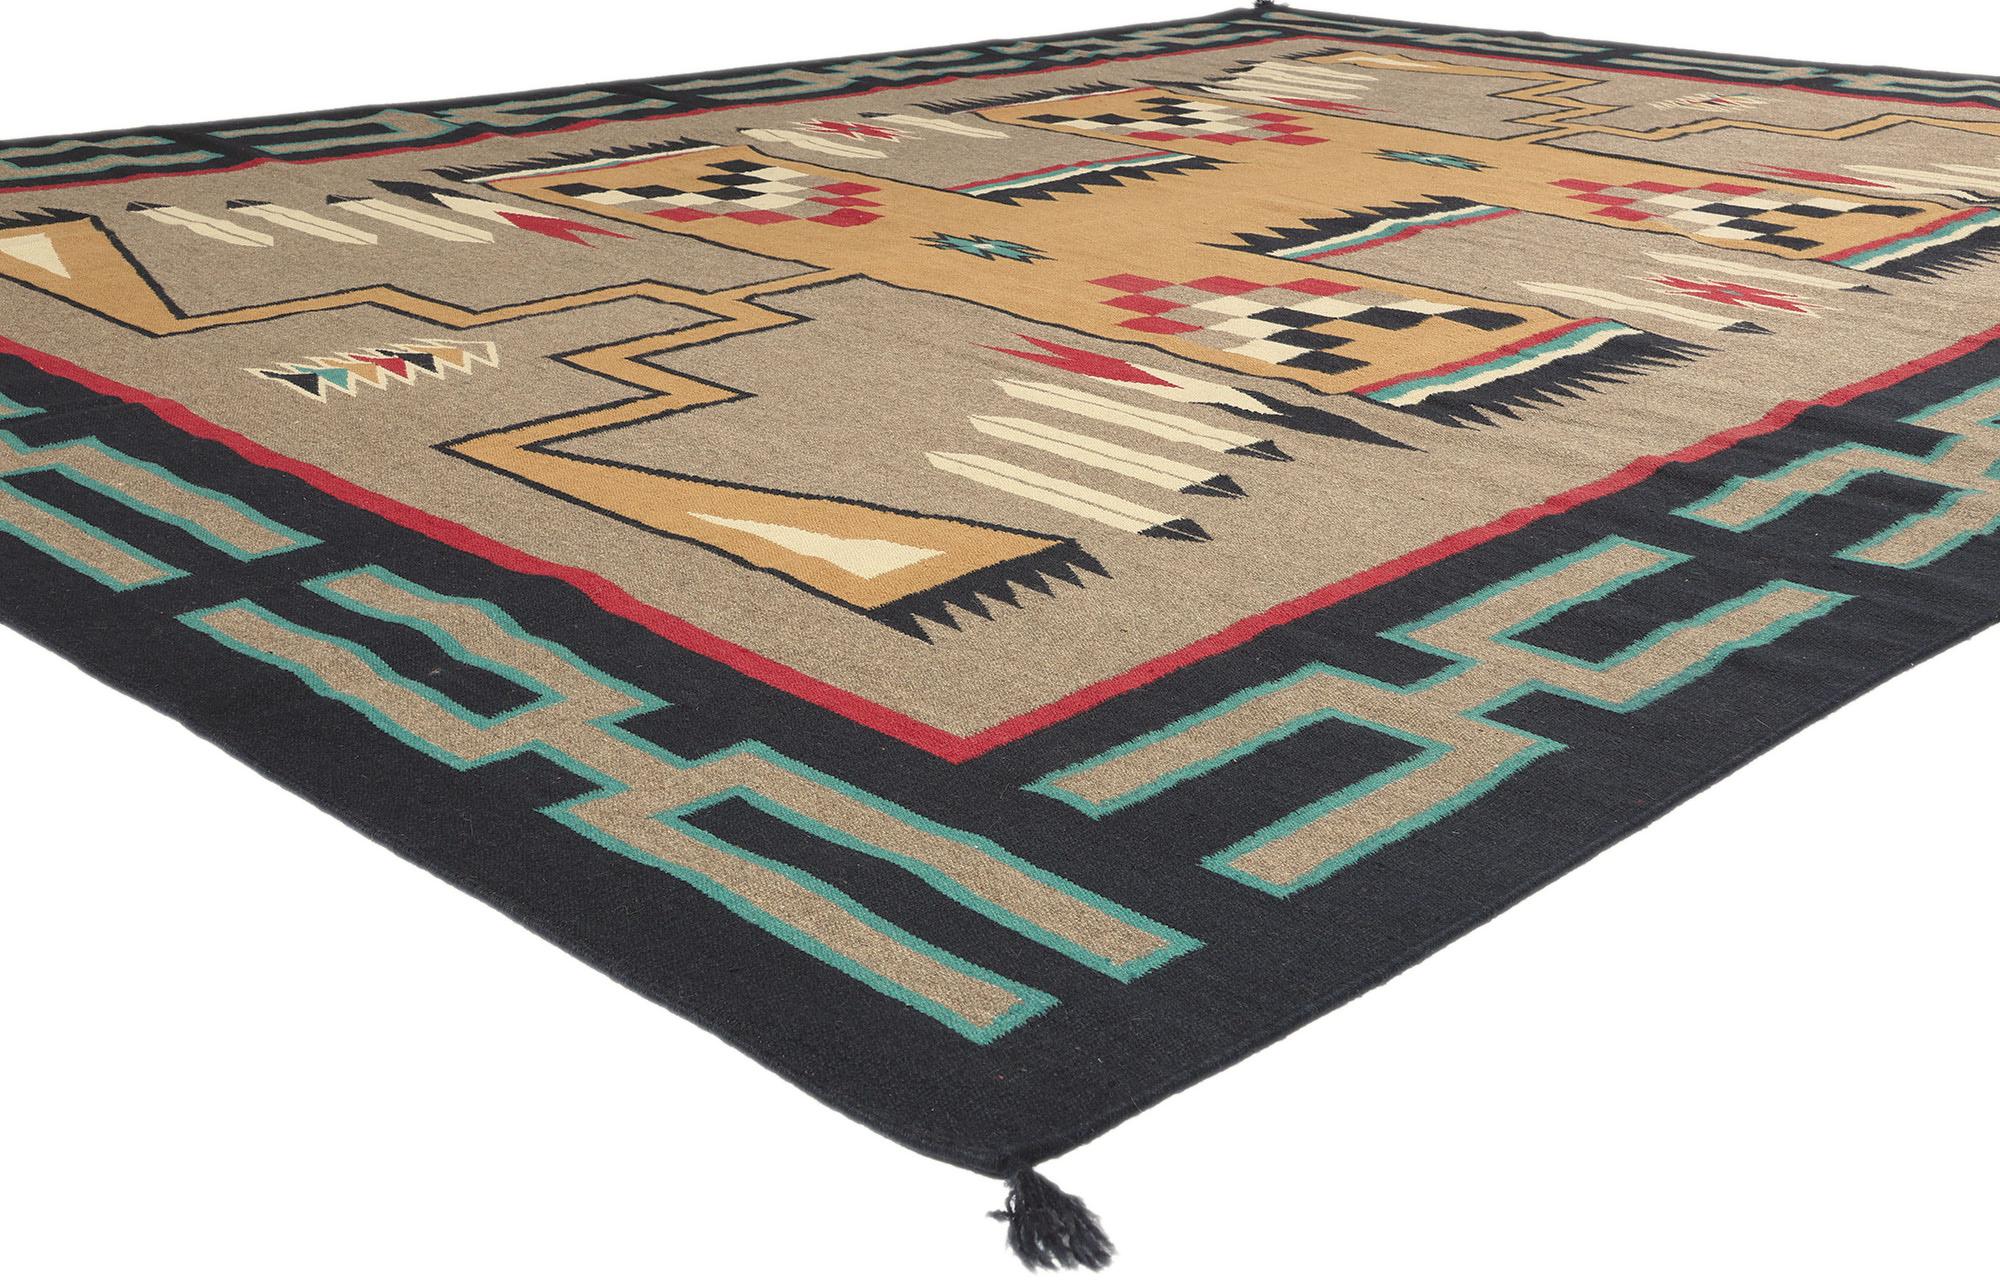 81037 Southwestern Navajo-Style Rug with Storm Pattern, 09'02 x 12'02. Embark on a journey through the captivating fusion of Modern style and Southwest allure with this meticulously handwoven Navajo-inspired rug, showcasing the iconic Storm Pattern.